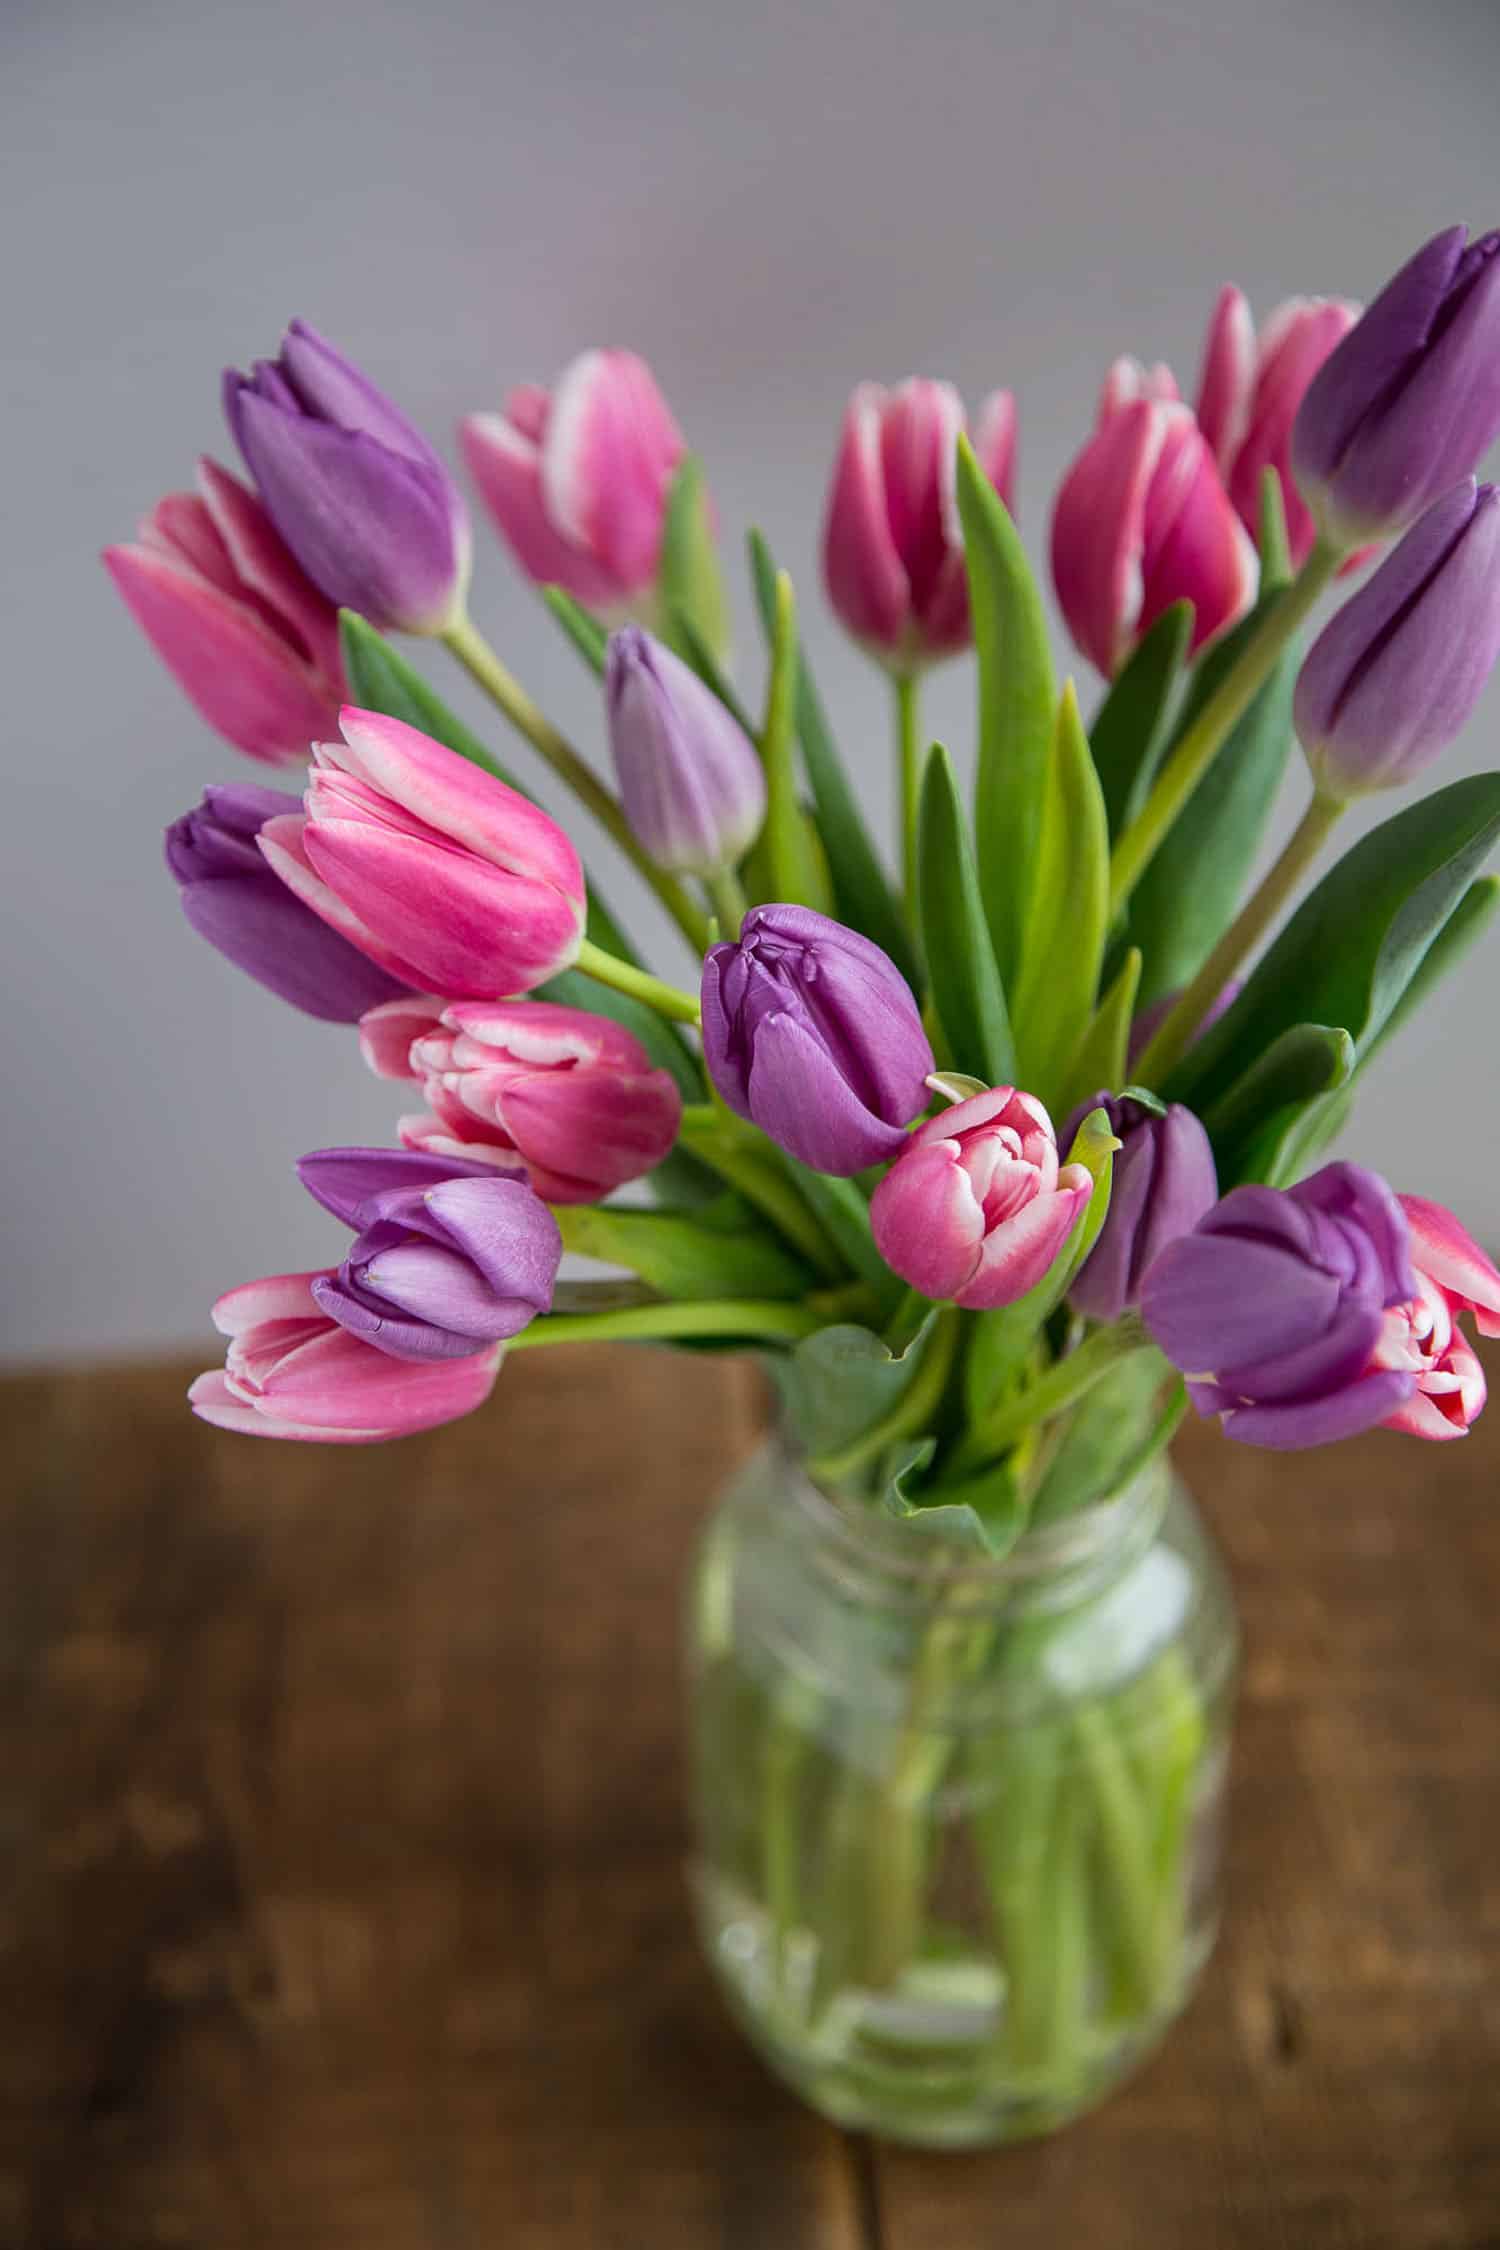 purple and pink tulips in a mason jar on a wooden table.